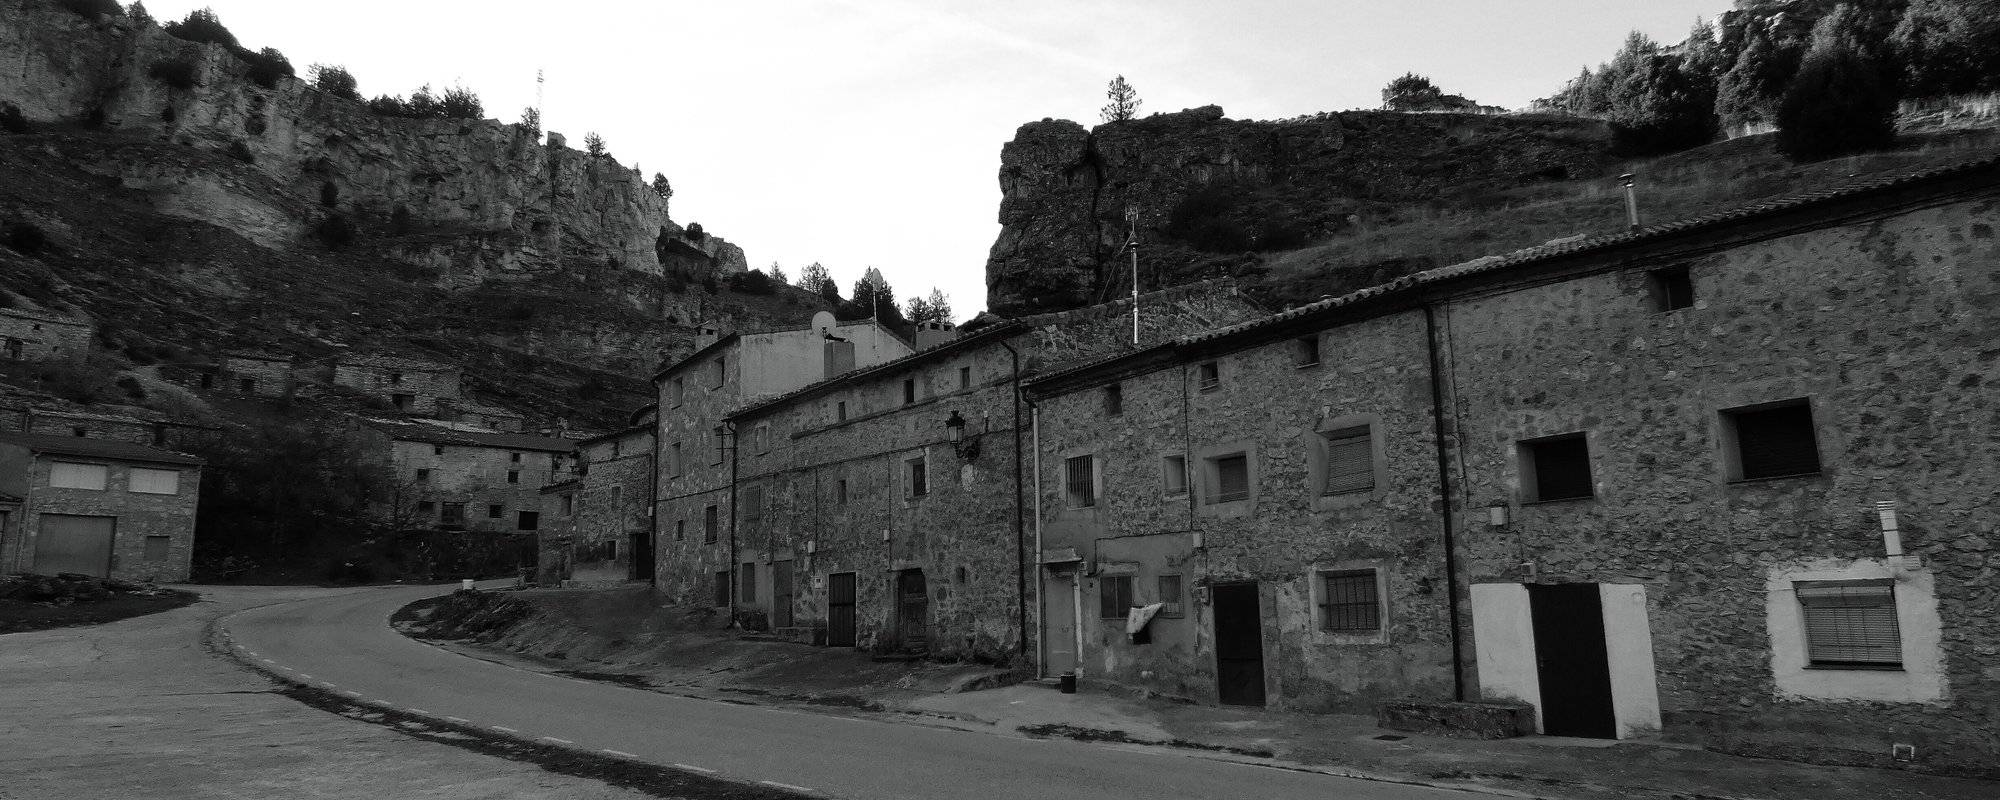 Towns of Spain in Black & White: Chaorna, Soria